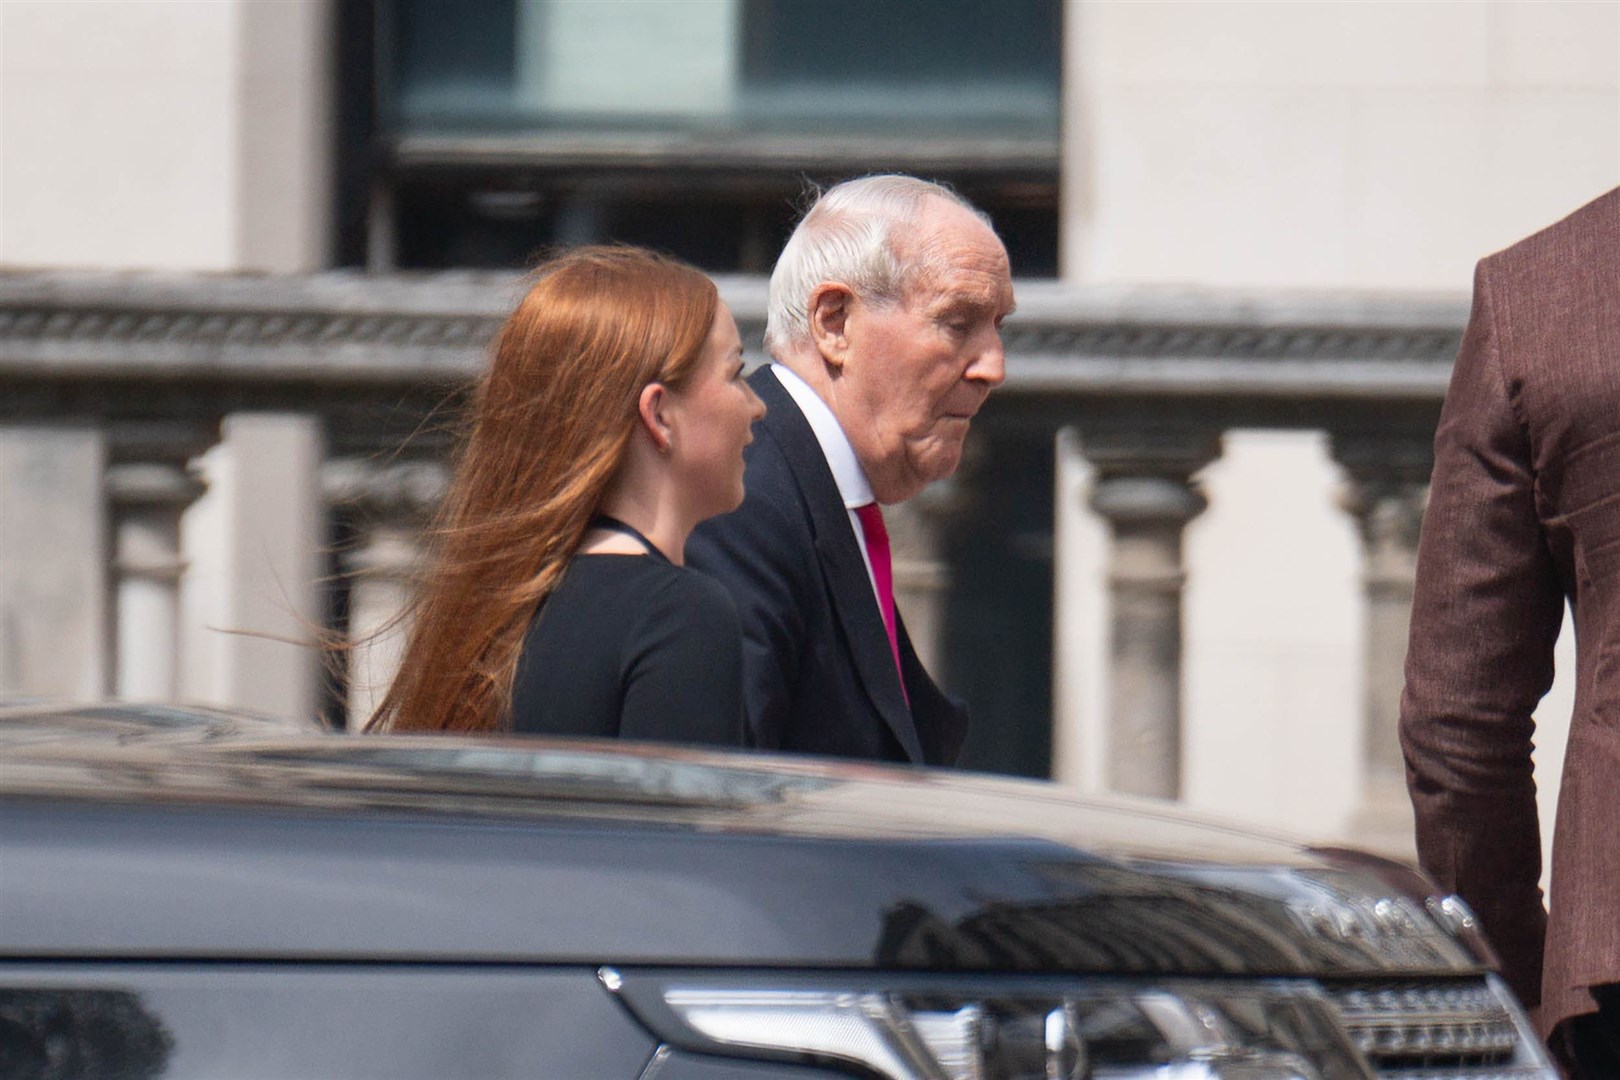 Lady Barclay had asked the judge to hand Sir Frederick, pictured, a suspended prison term (James Manning/PA)